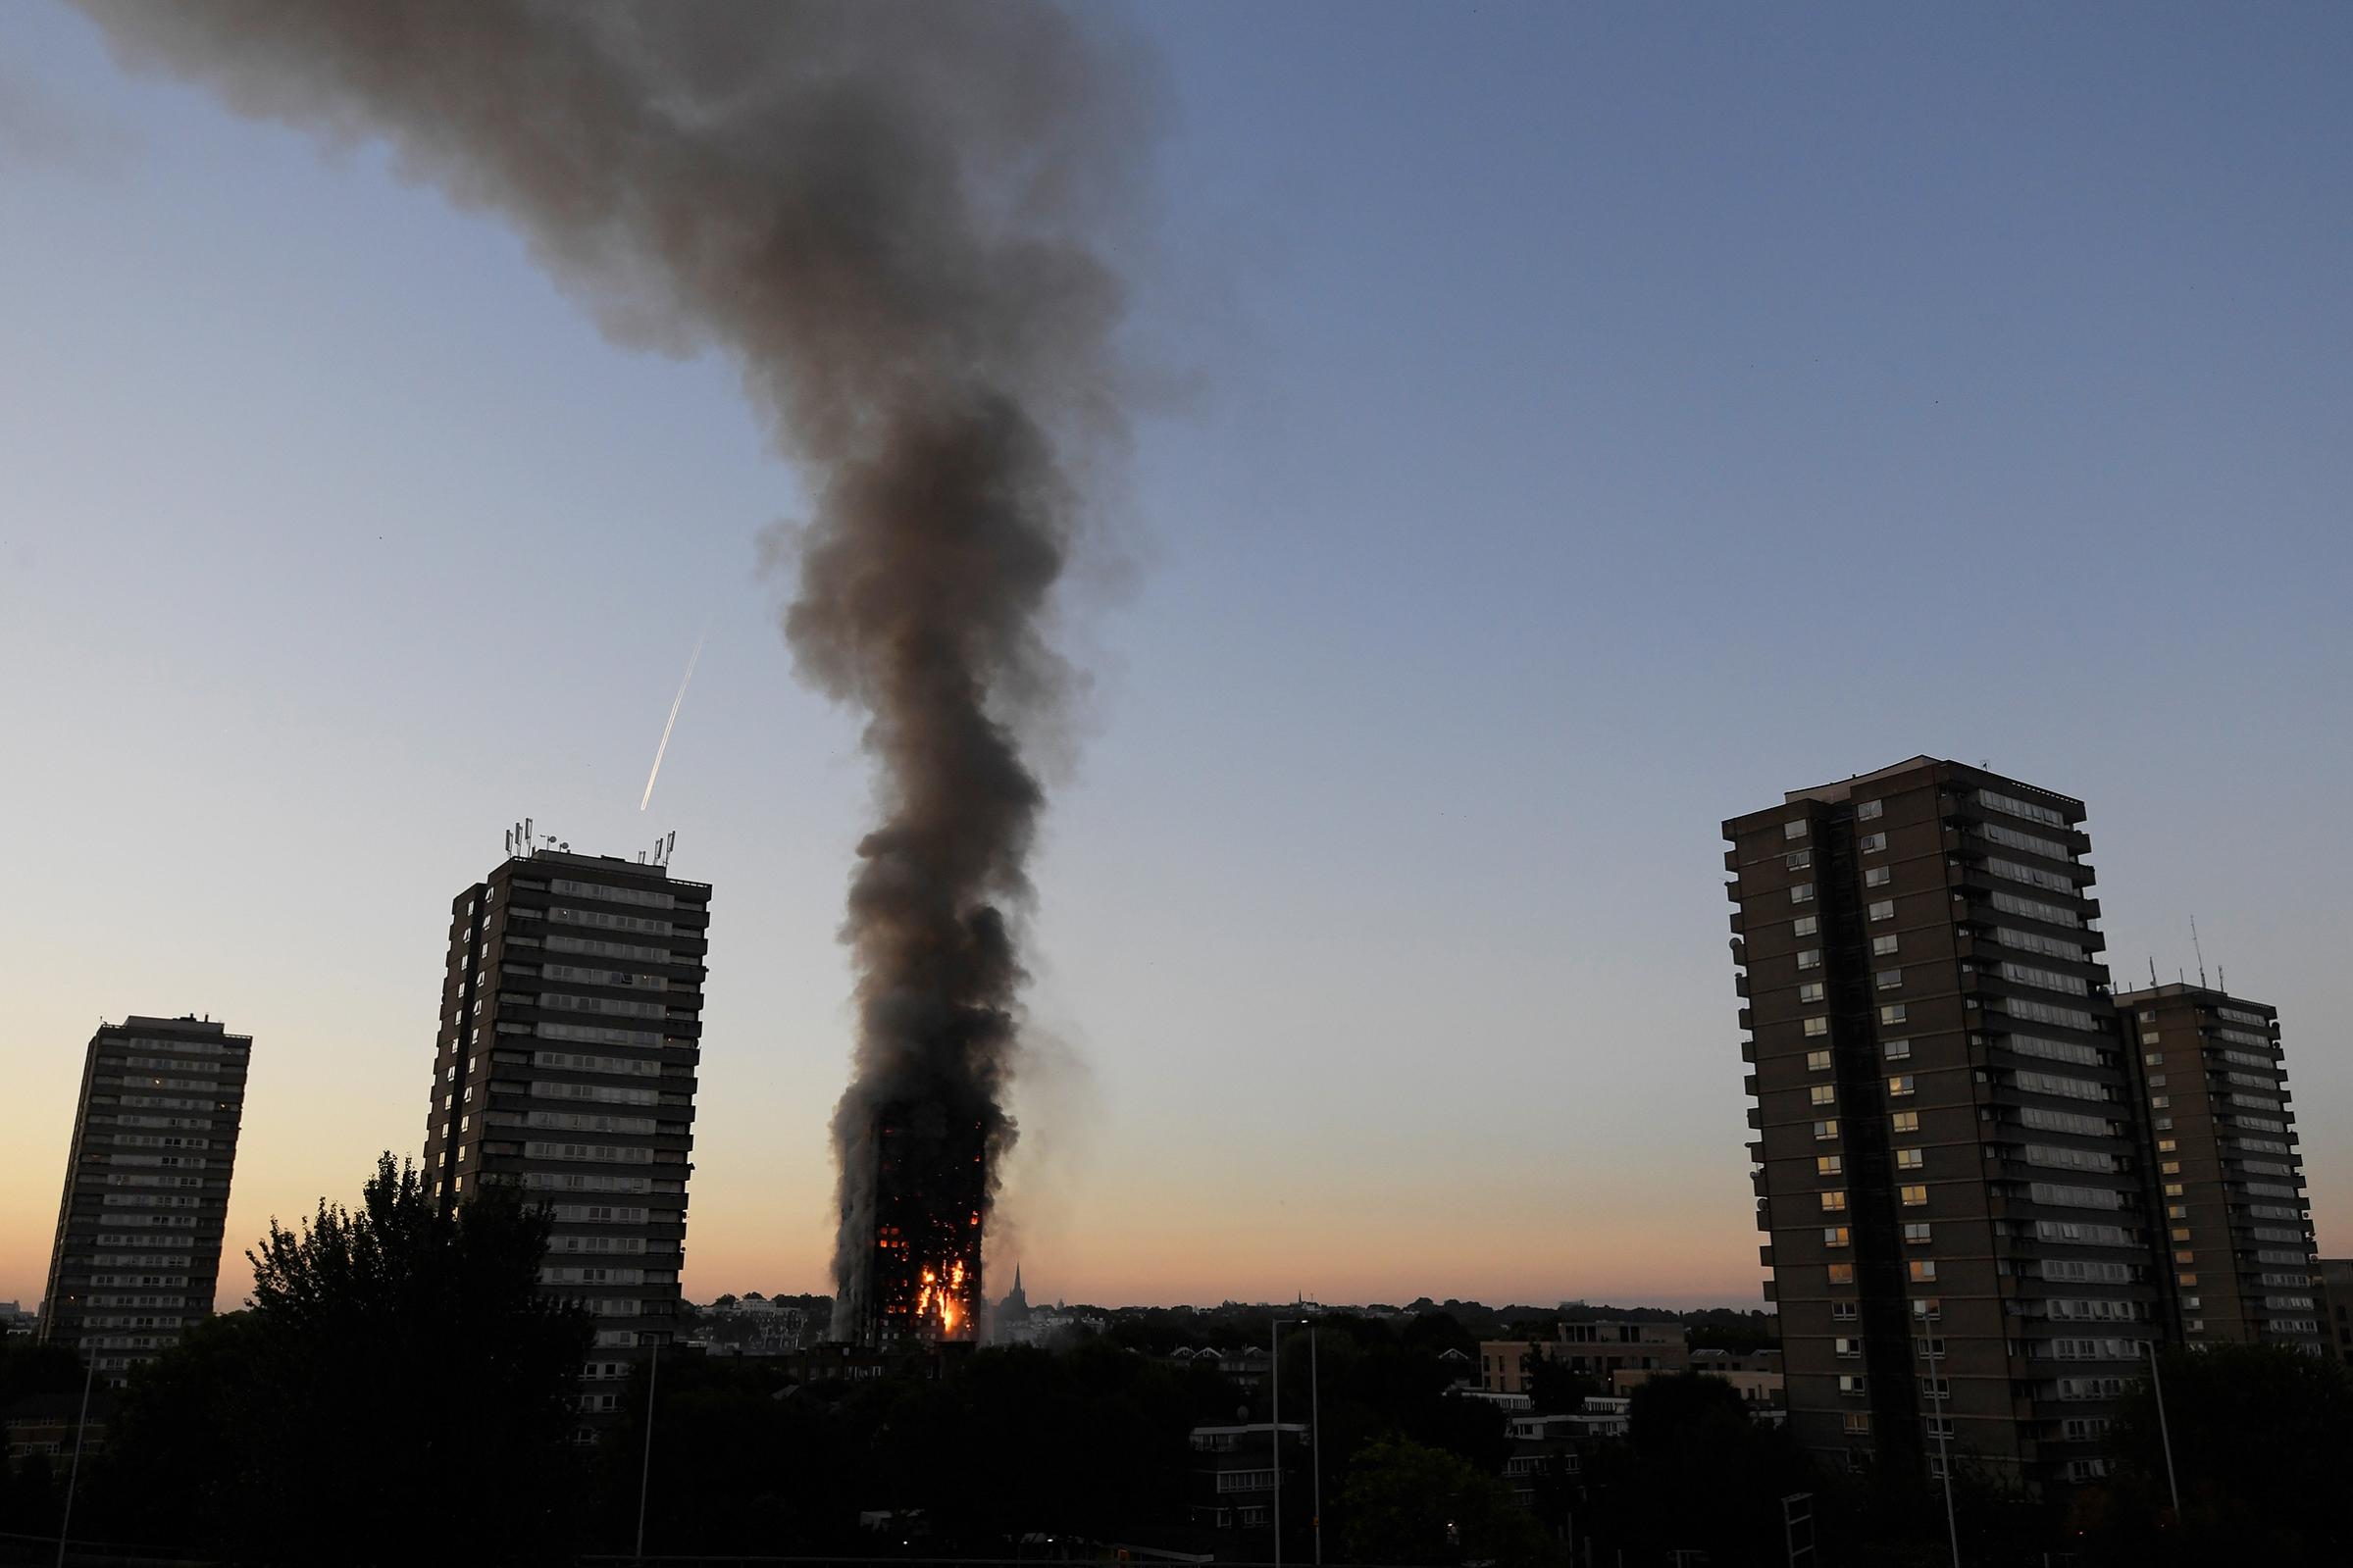 Flames and smoke billow as firefighters deal with a serious fire in a tower block at Latimer Road in West London on June 14, 2017.